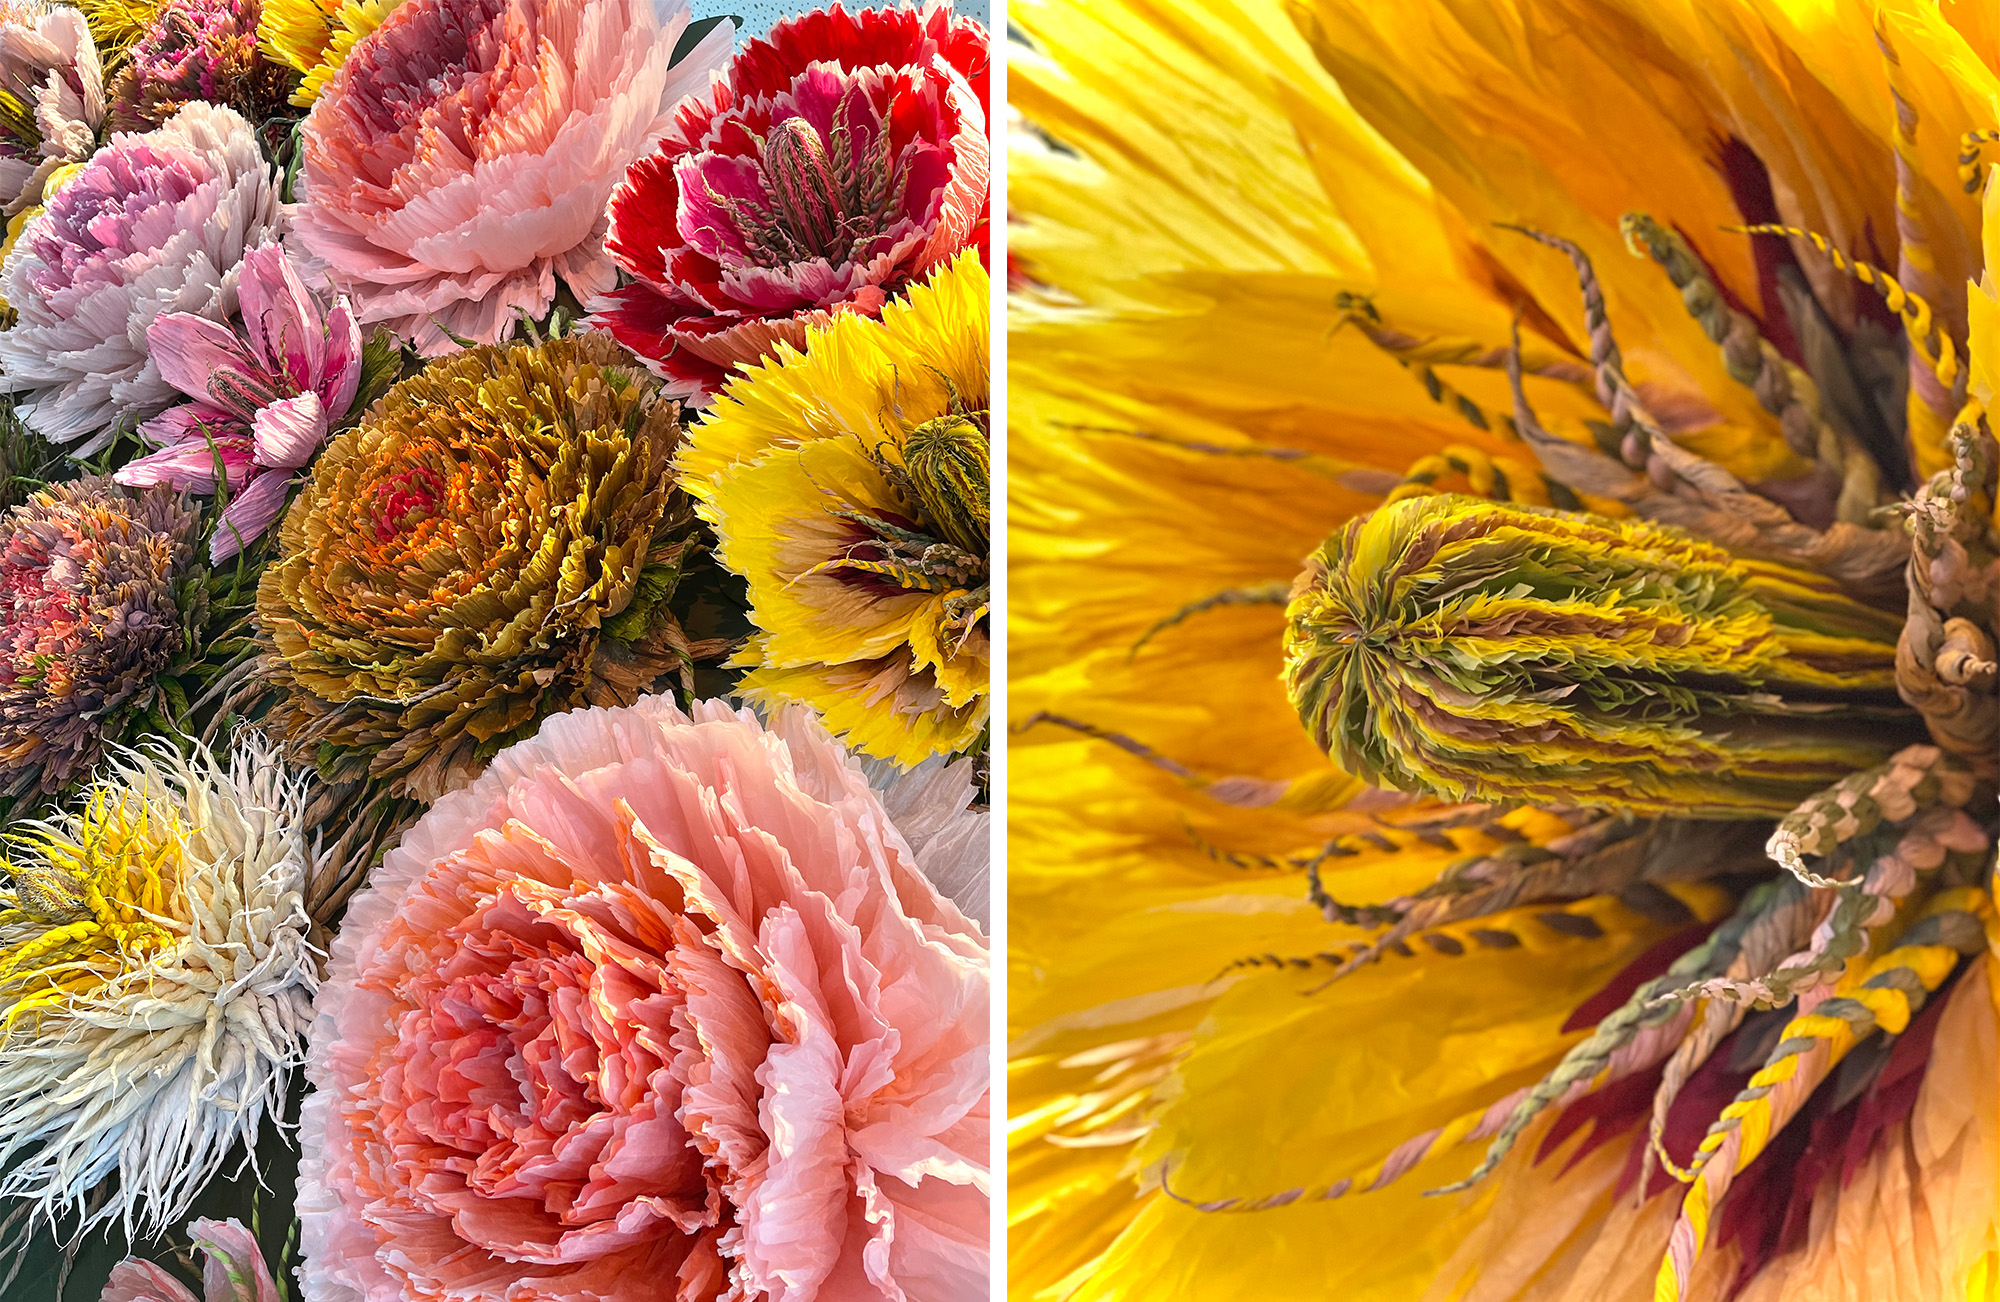 Two details of paper flower sculptures. The left image shows numerous flowers in different shapes and colors. The right image shws the center of a yellow flower.